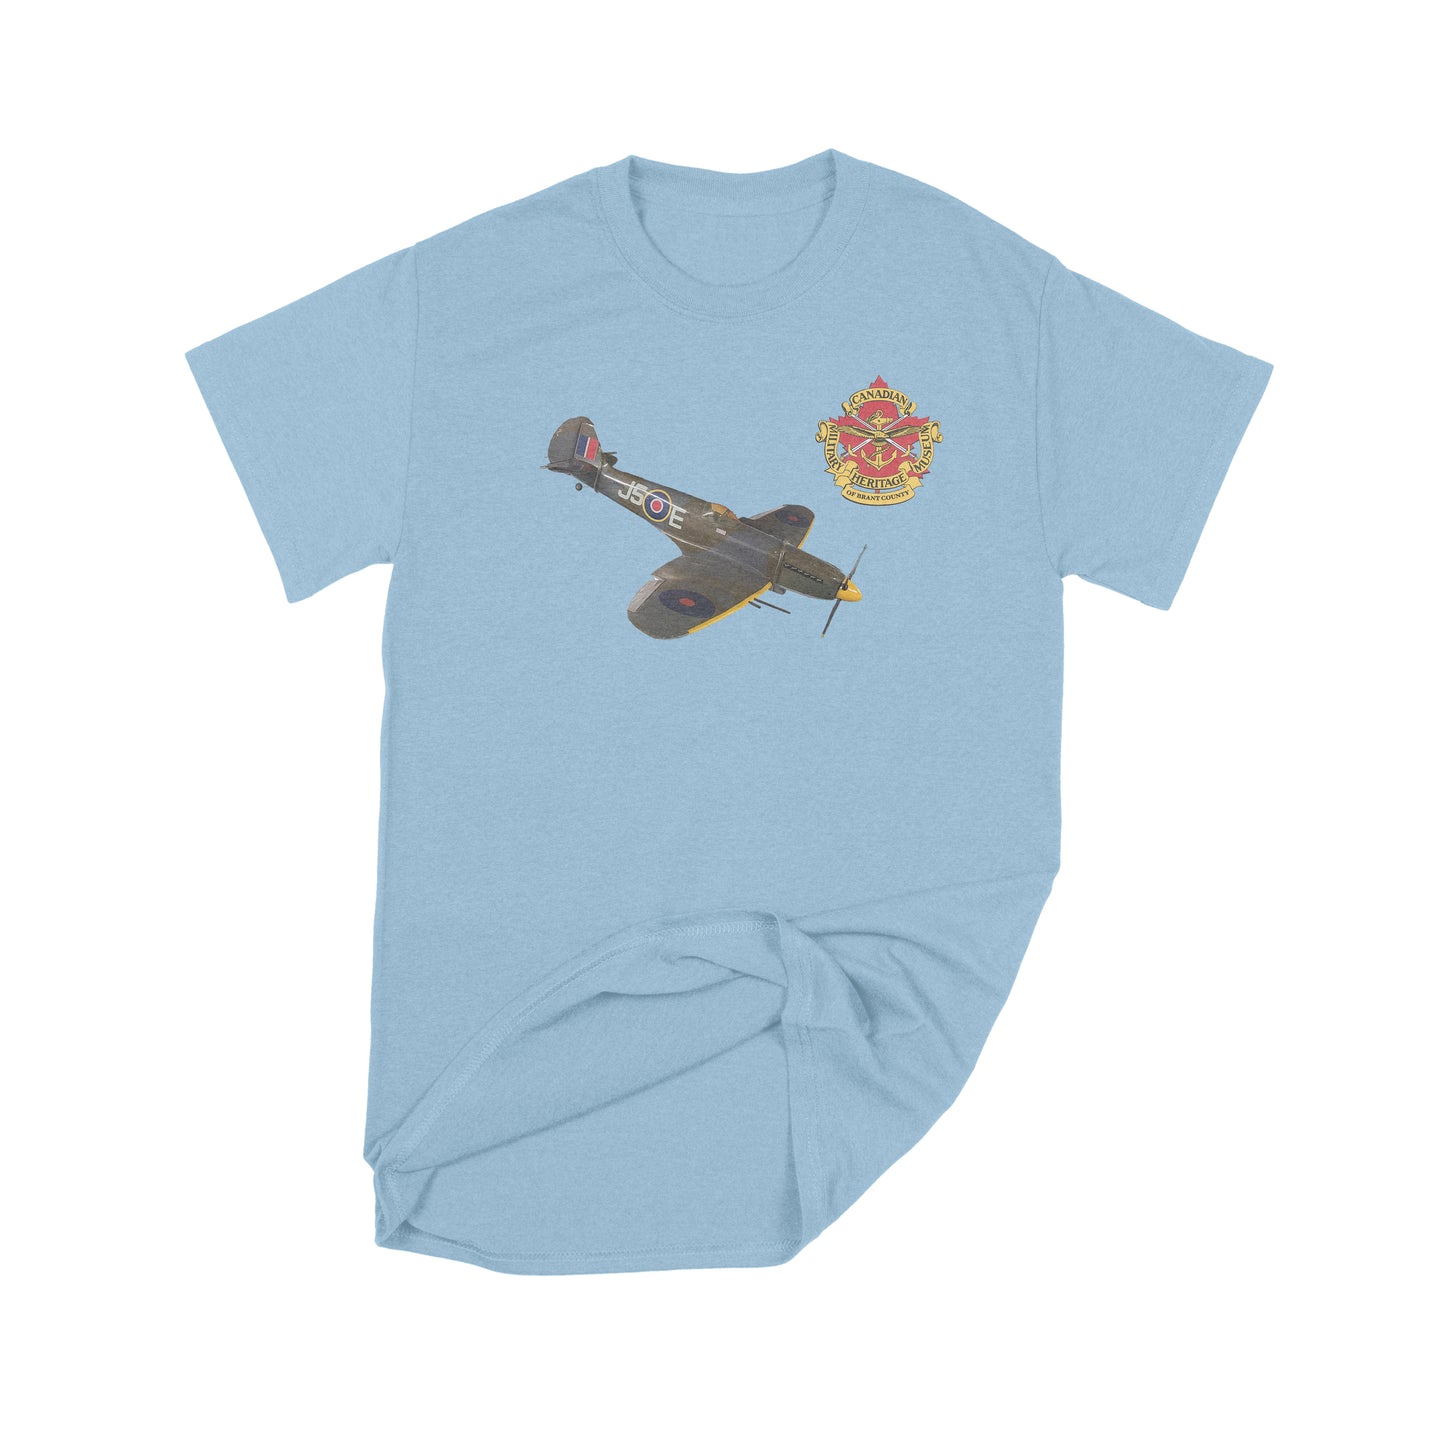 Brantford, Canadian Military Heritage Museum, Fat Dave, Museum, Spitfire, T-Shirt, Light Blue